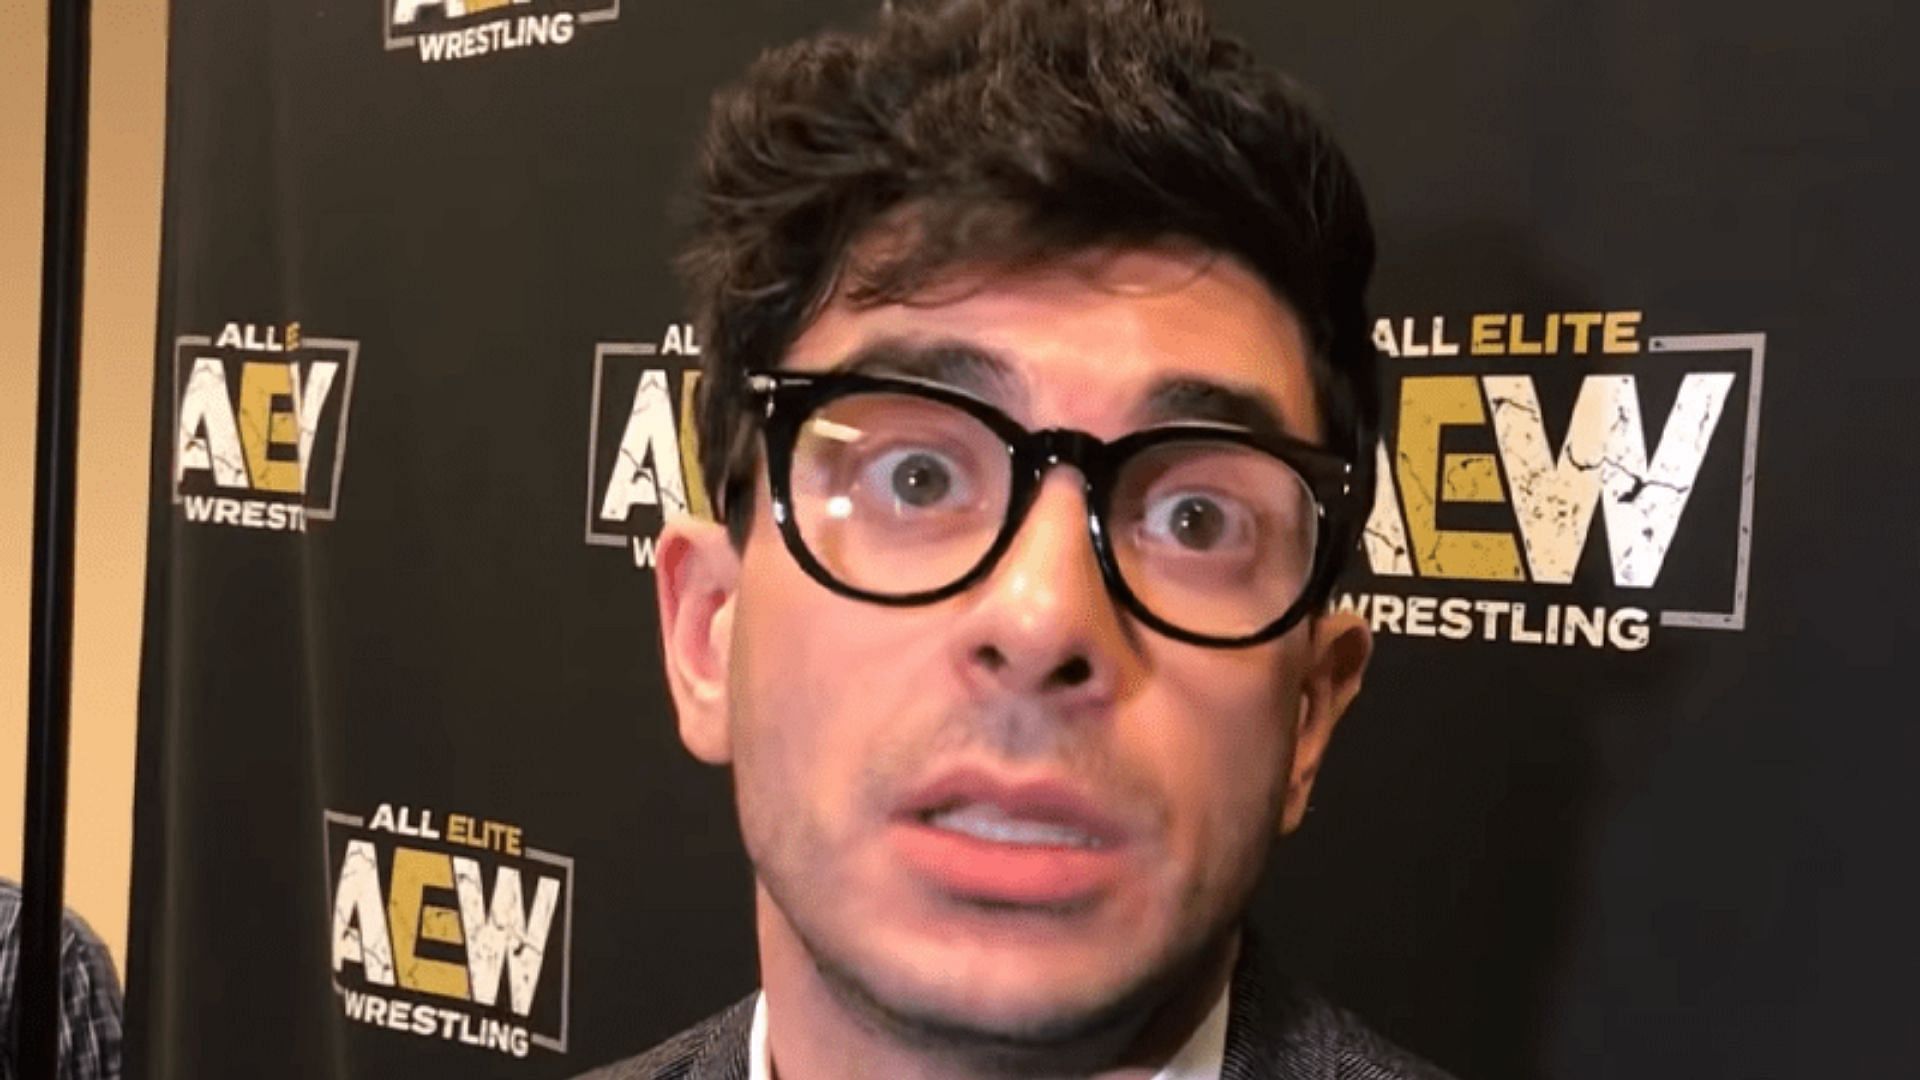 Tony Khan at an AEW media event in 2019